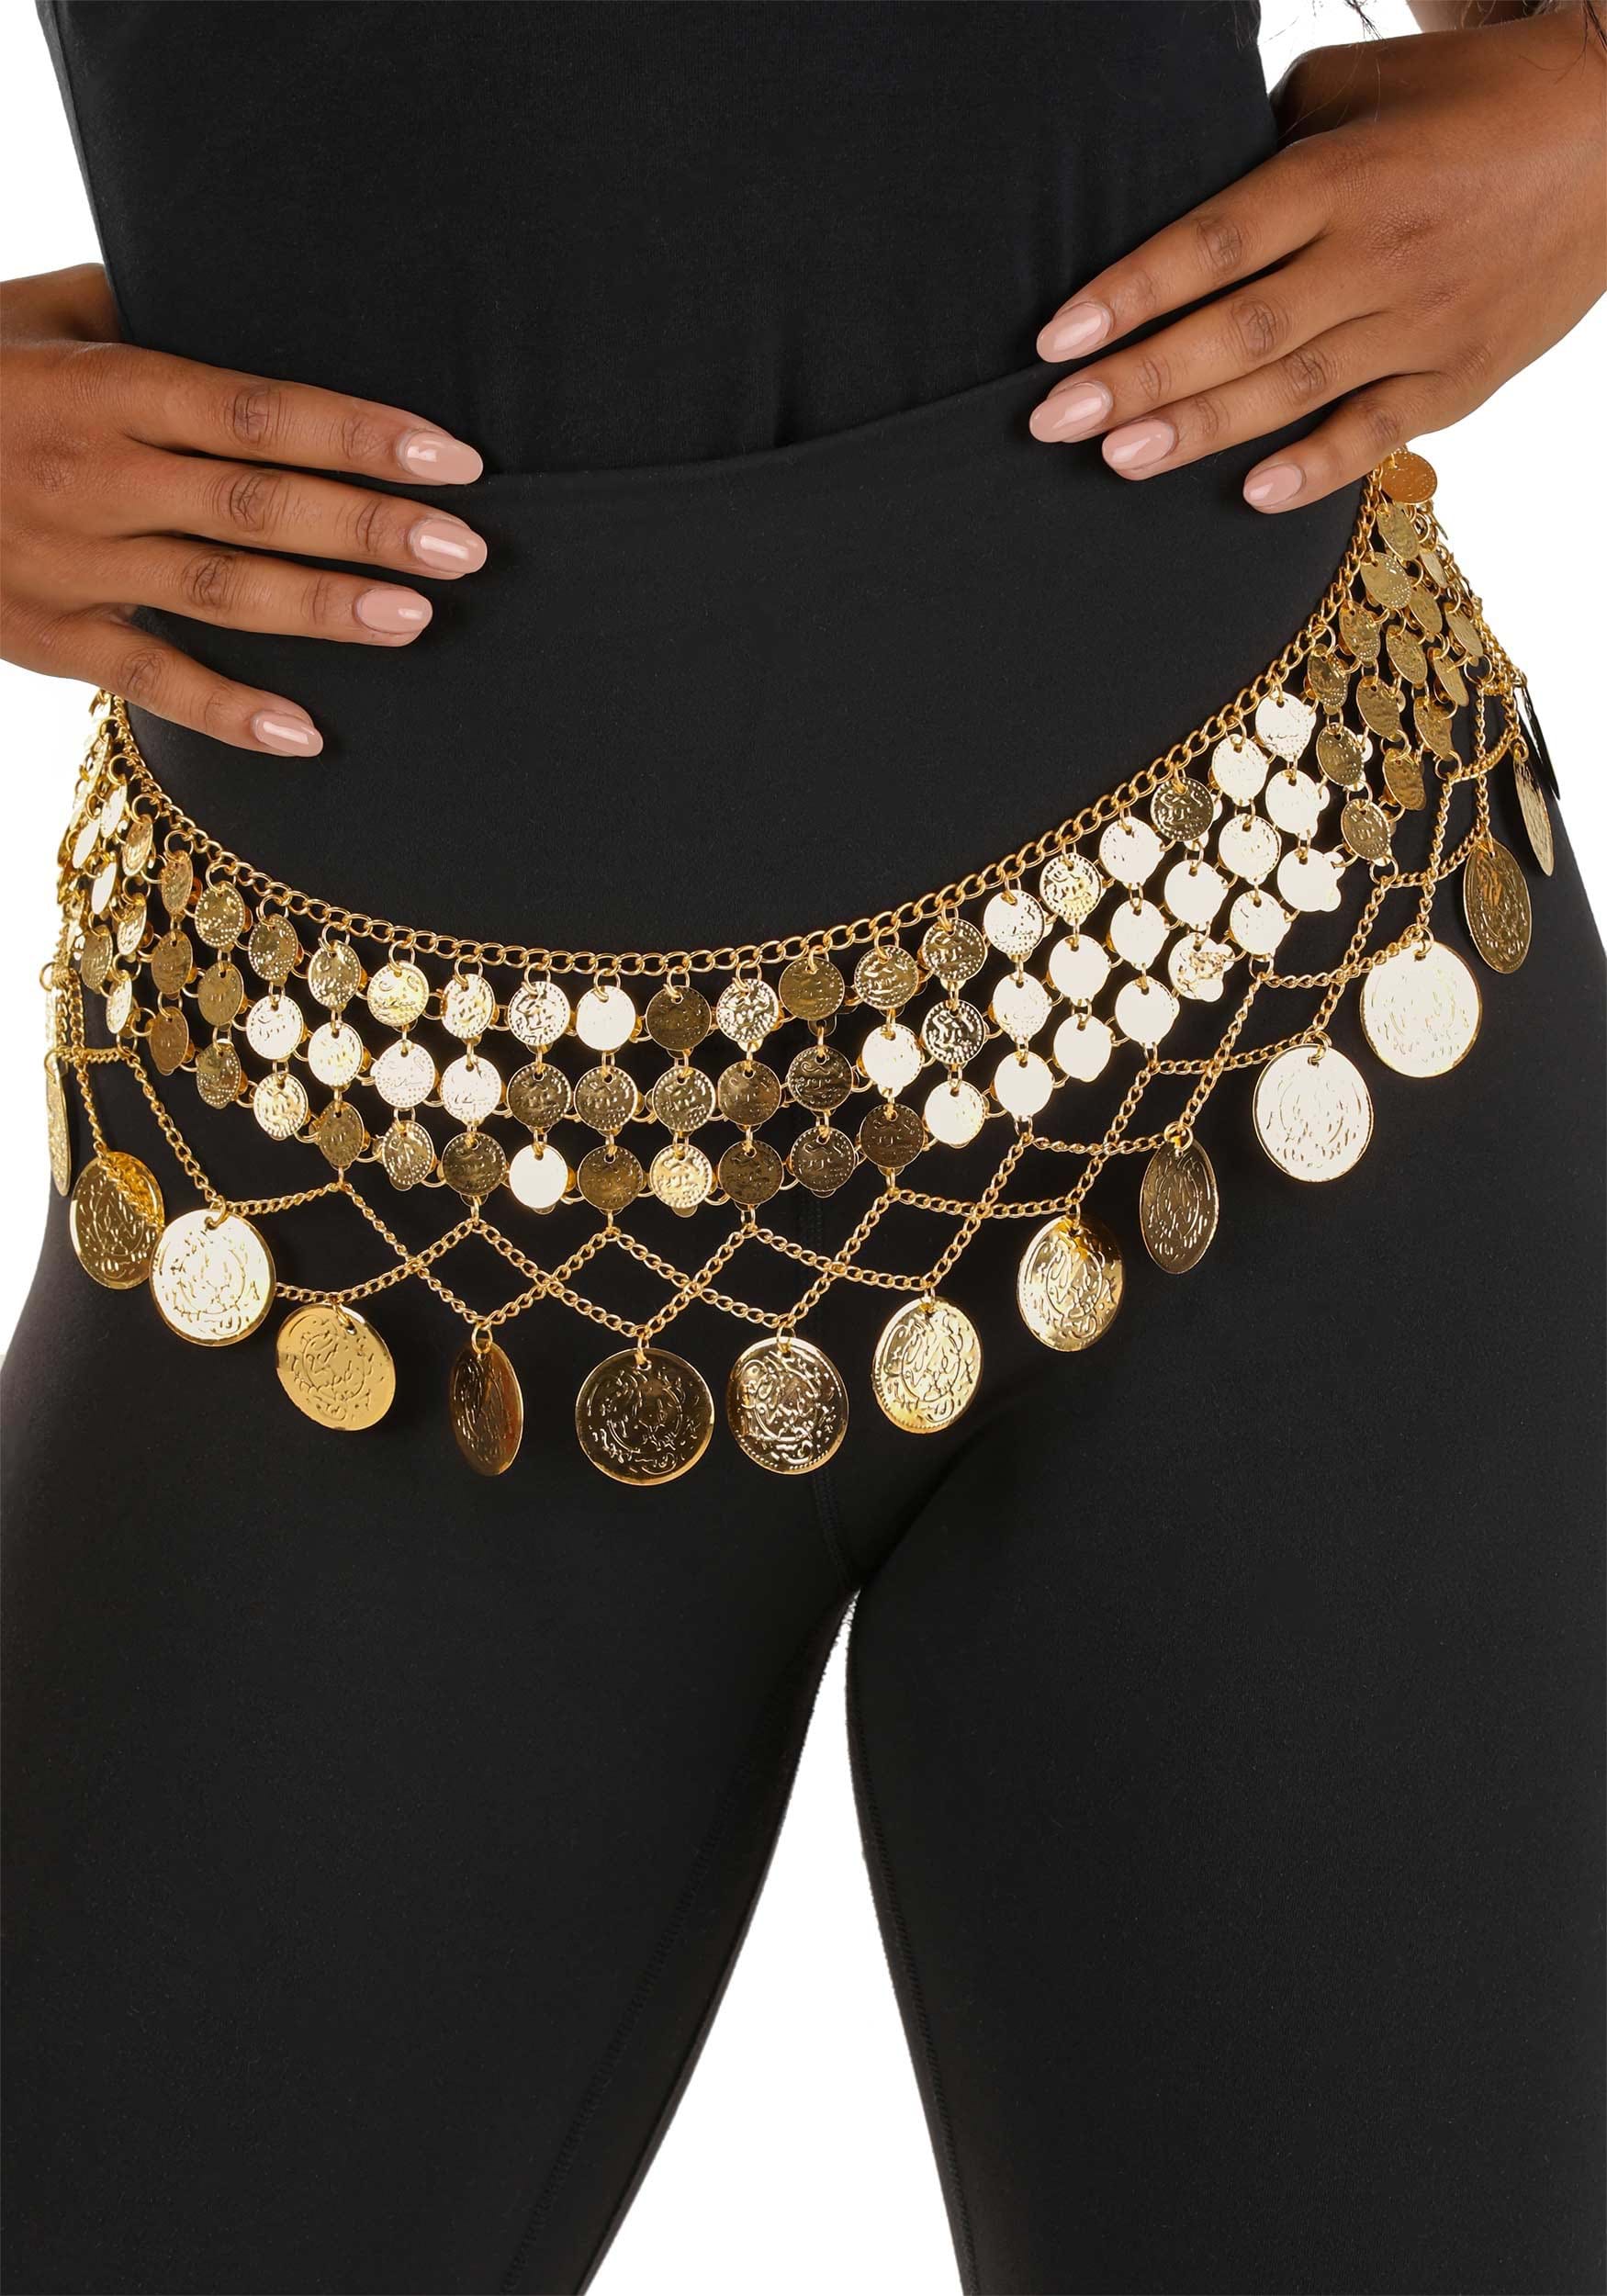 https://images.halloweencostumes.ca/products/87692/1-1/adult-belly-dancer-costume-coin-belt.jpg